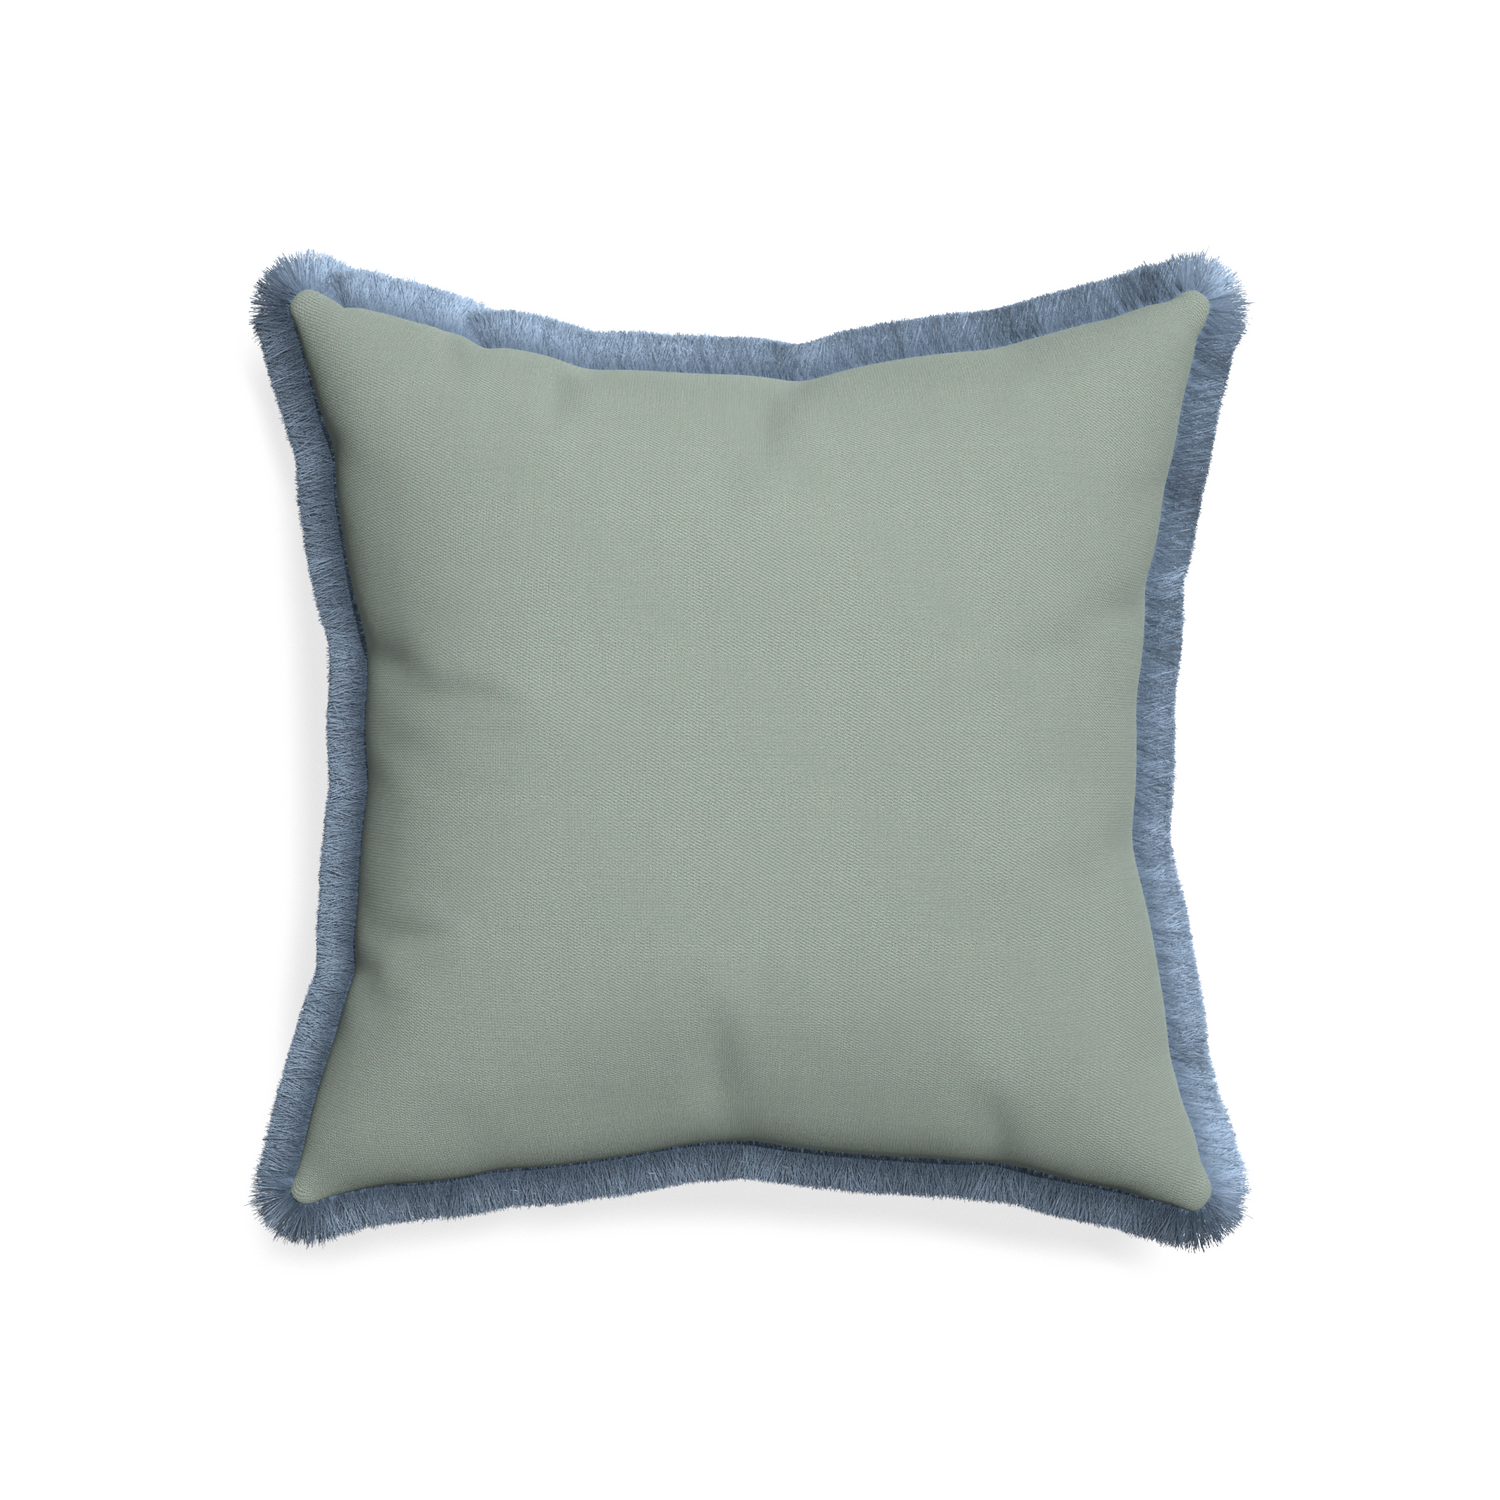 20-square sage custom sage green cottonpillow with sky fringe on white background